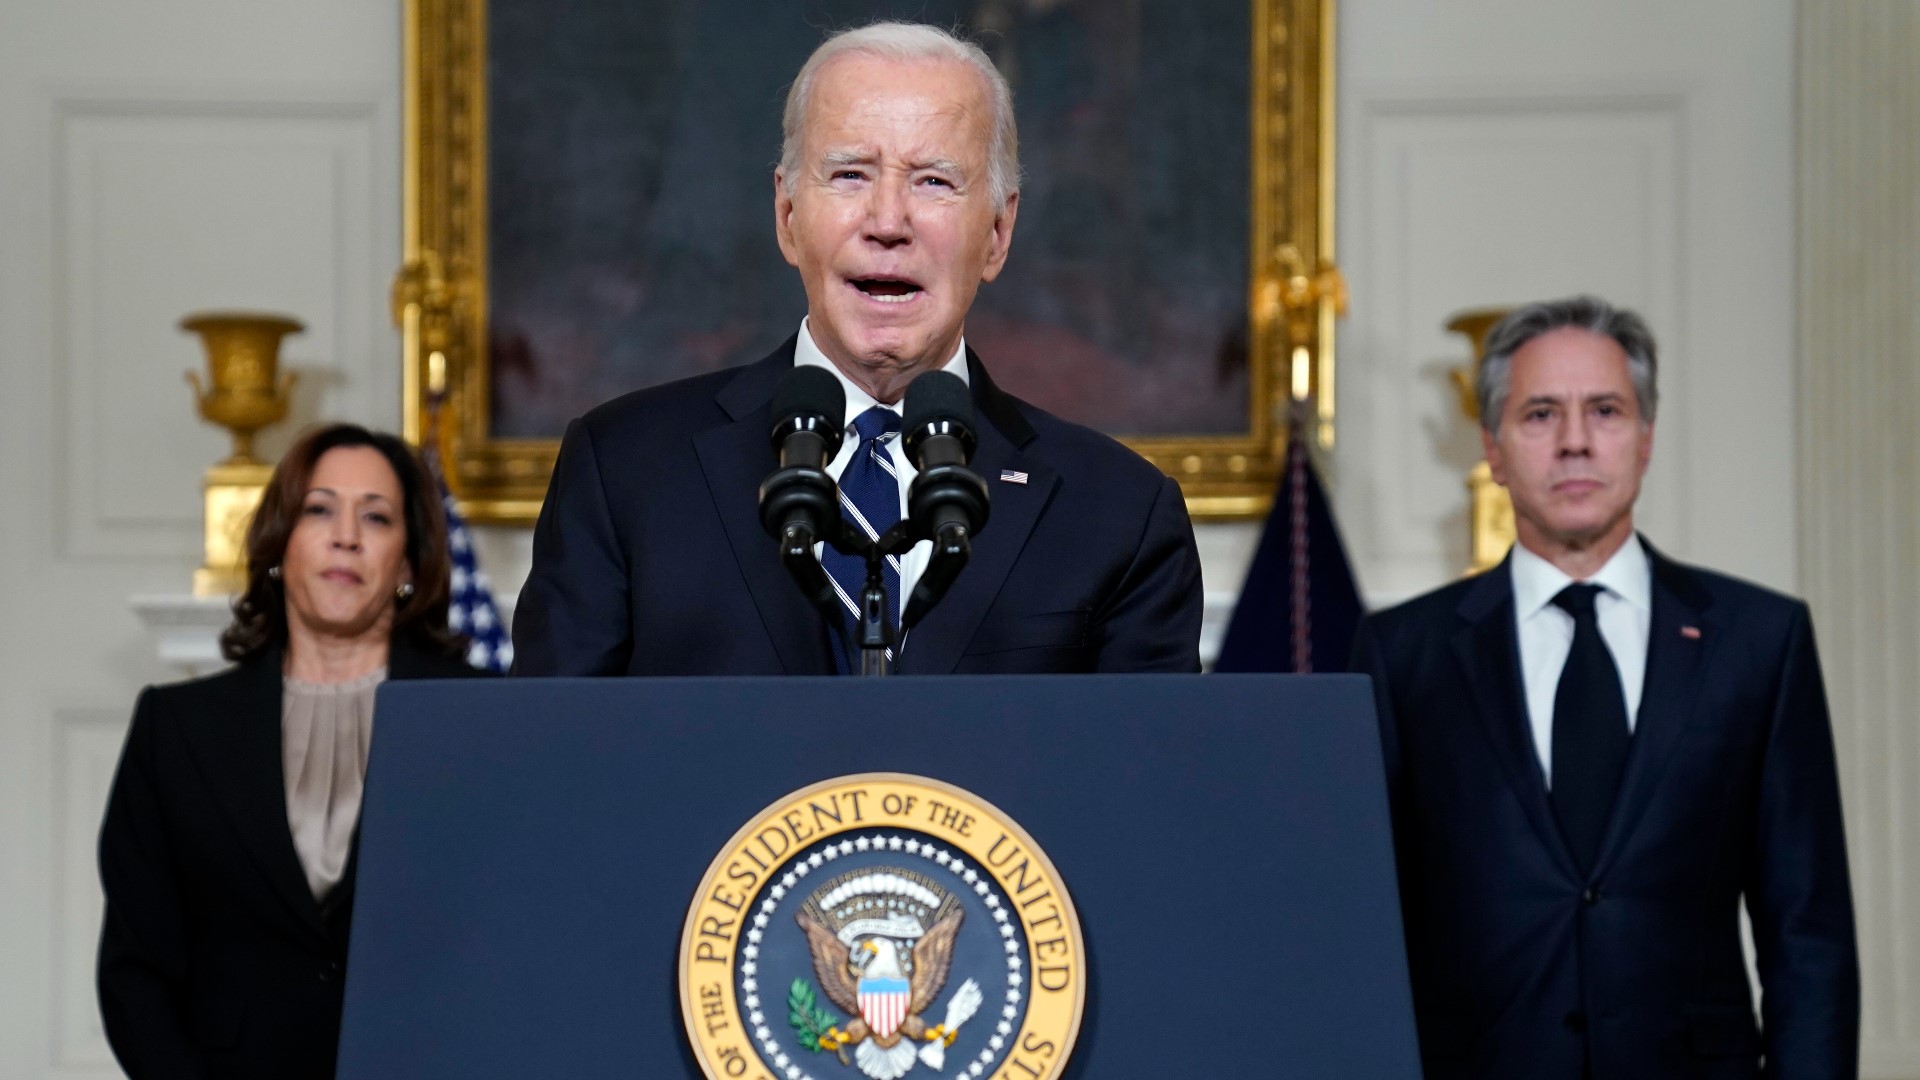 Biden, in his remarks and statements since Hamas launched its attacks, has repeatedly emphasized his shock over the breadth and brutality of the Hamas assault.